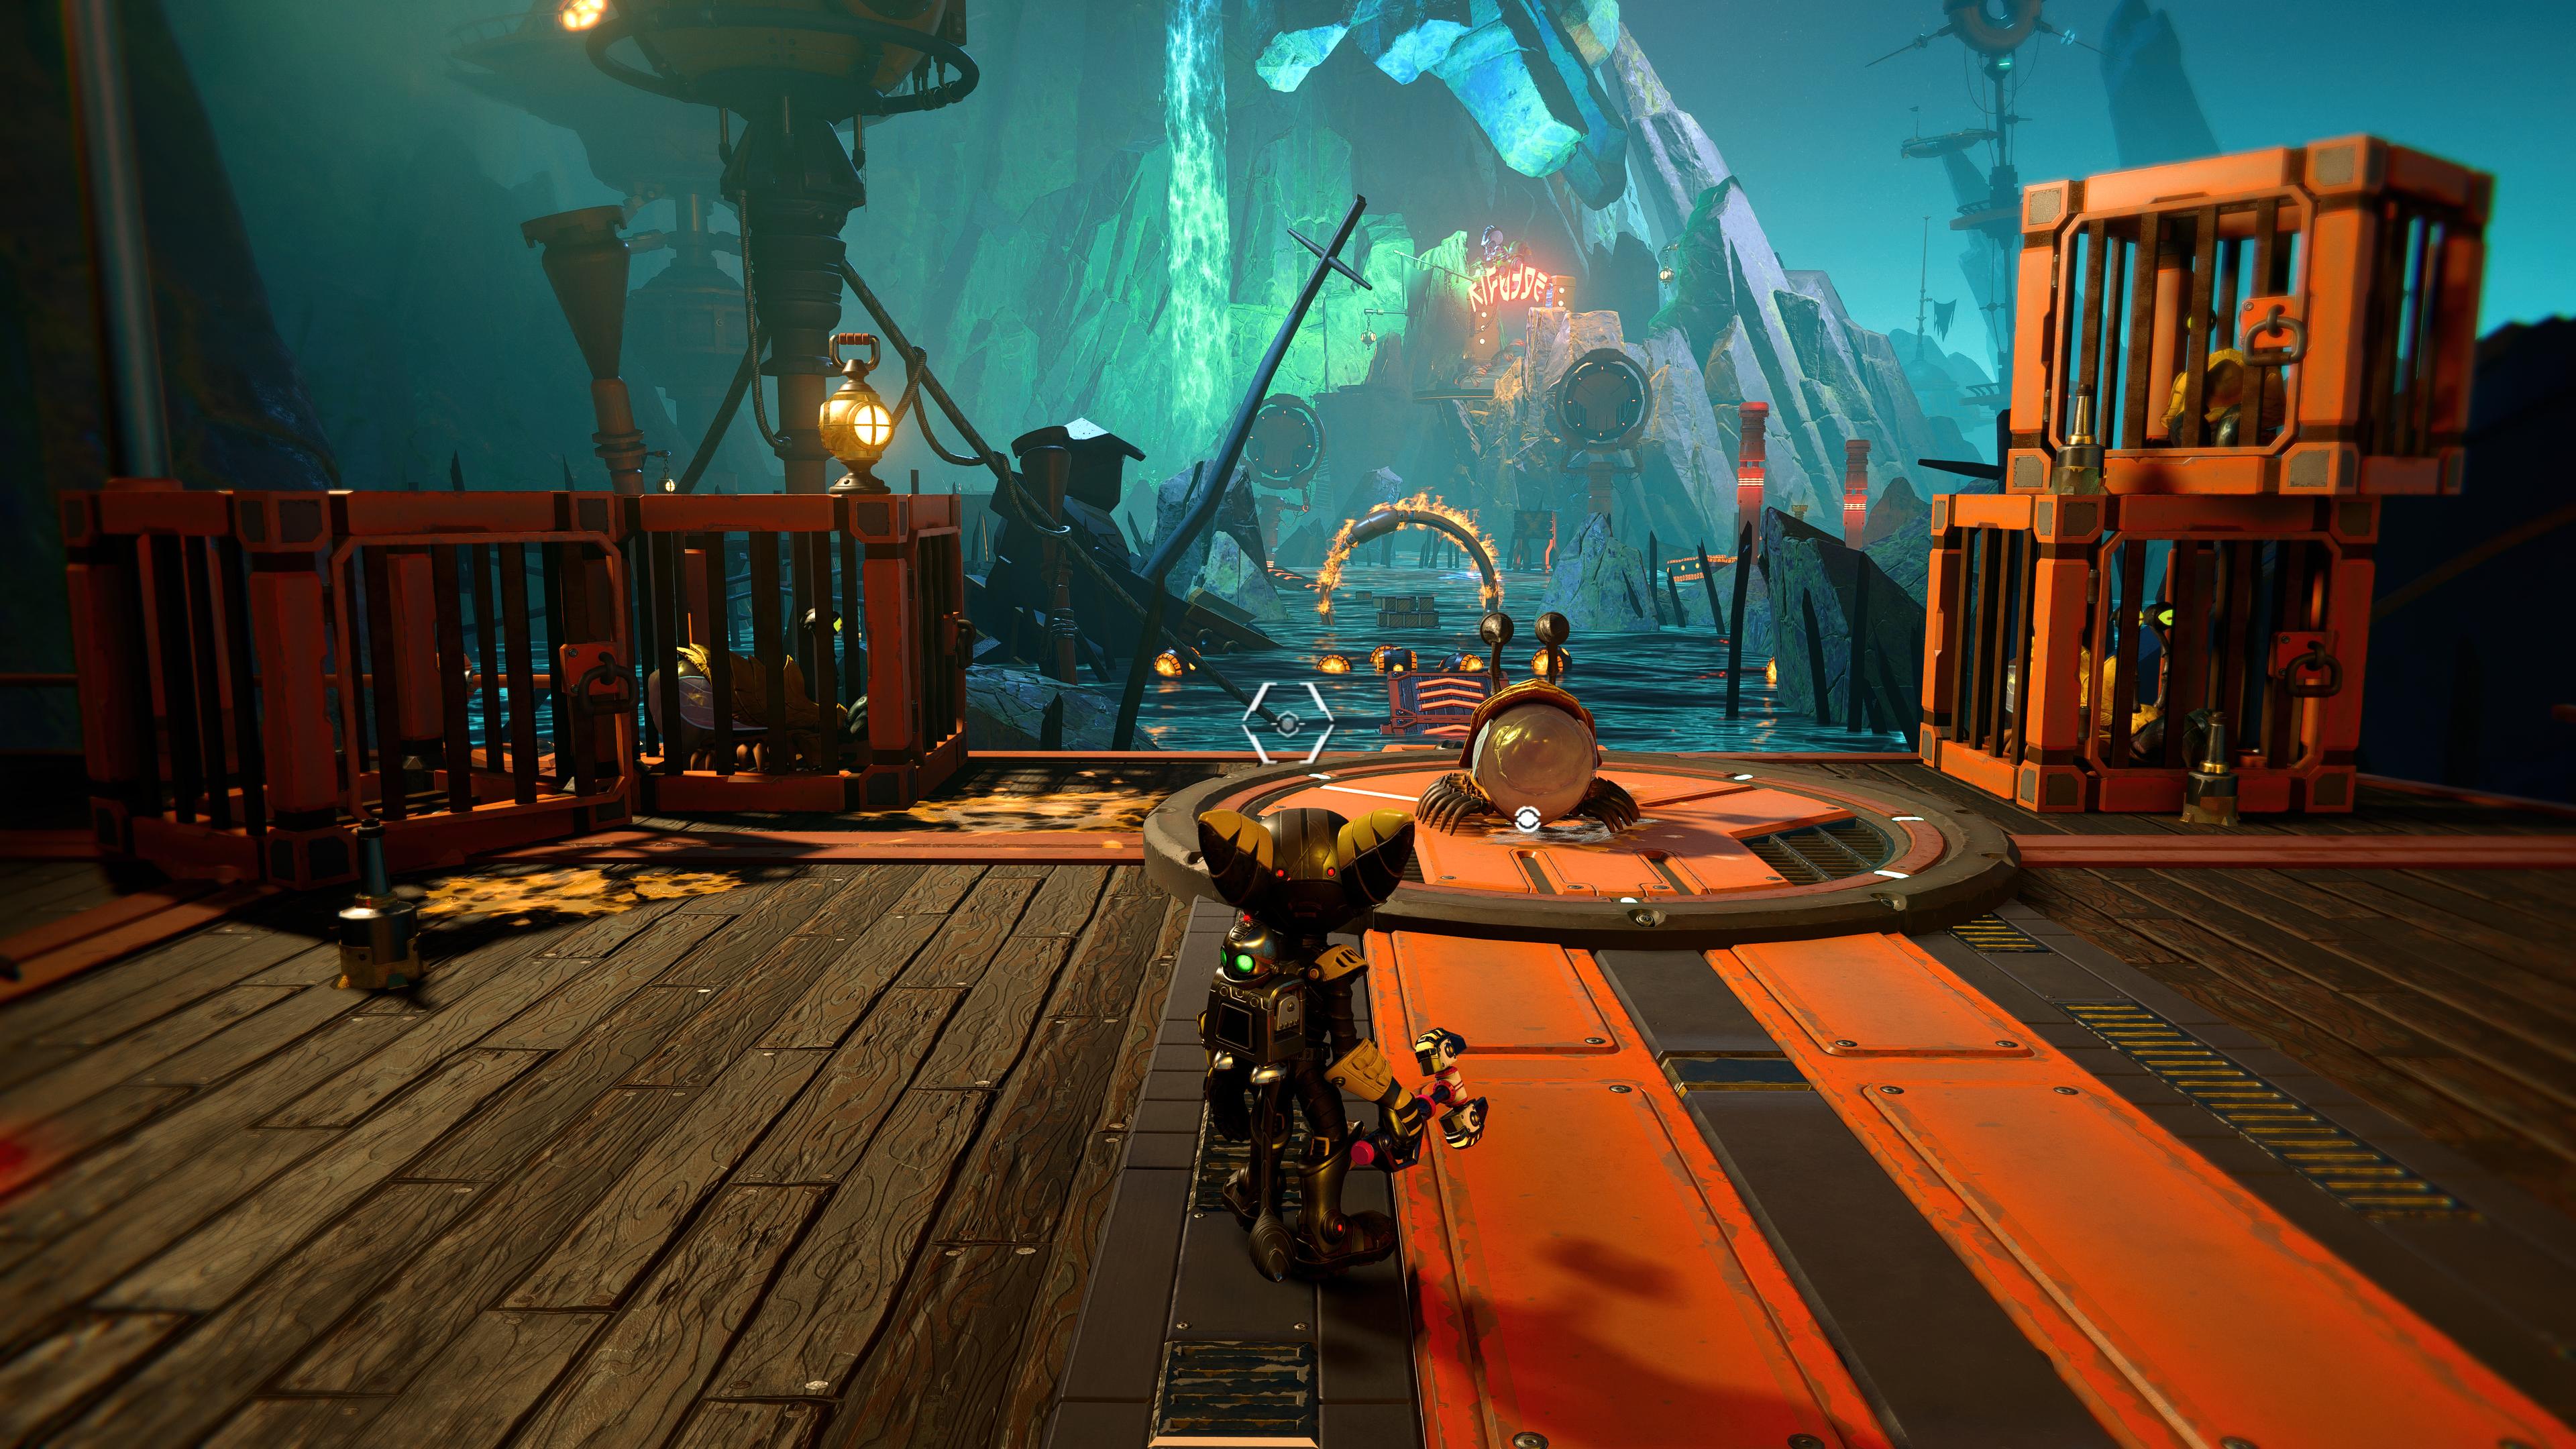 Ratchet & Clank: Rift Apart peaks at less than 9k concurrent players on  Steam, third worst PC launch for PlayStation game